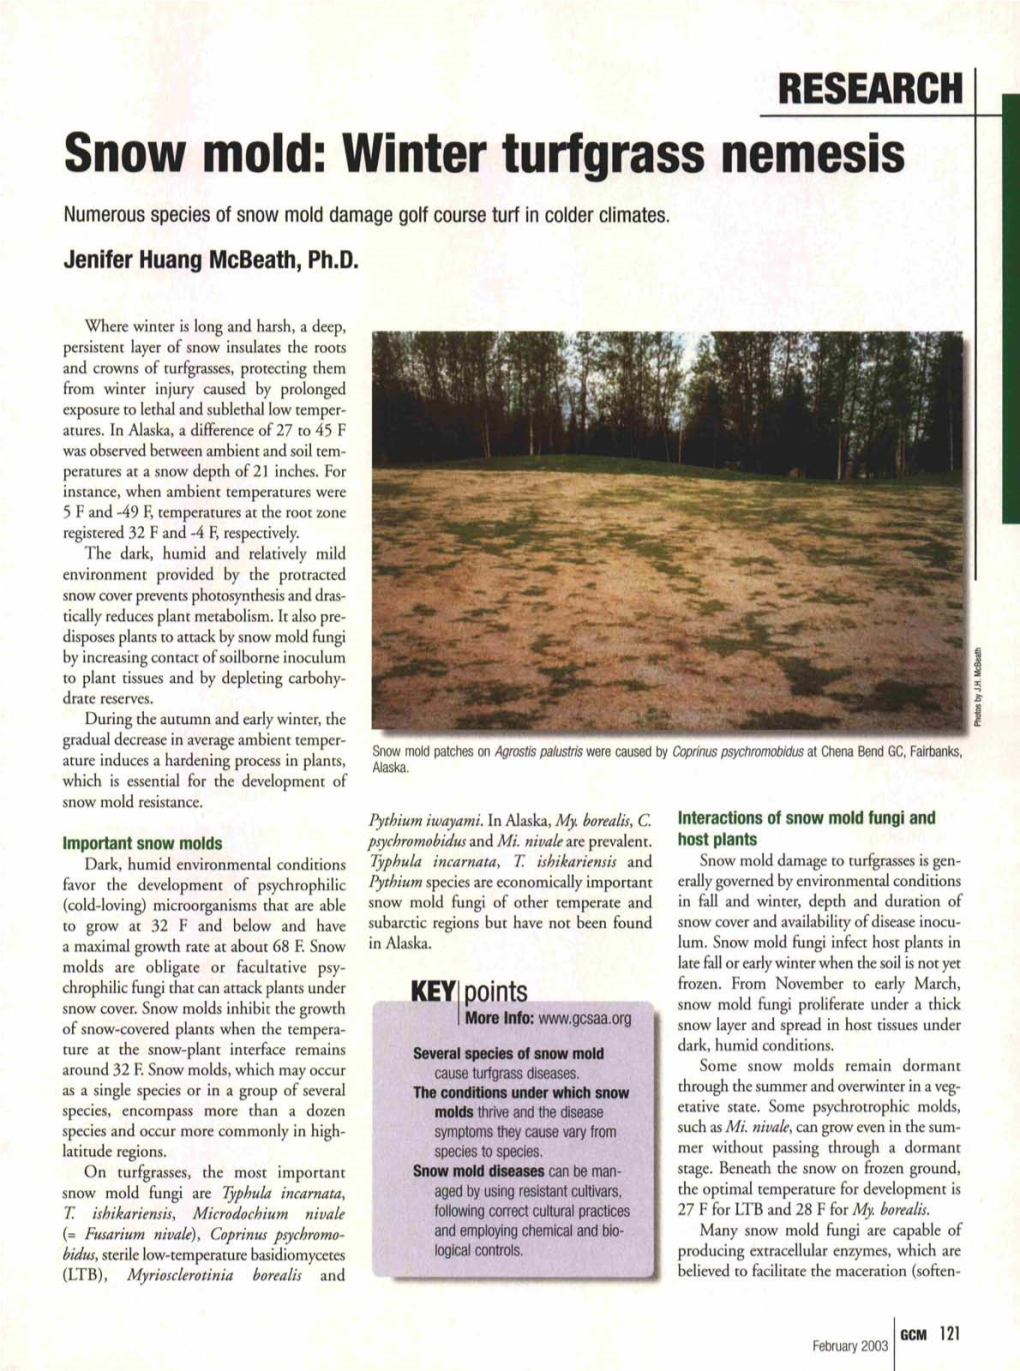 Snow Mold: Winter Turfgrass Nemesis Numerous Species of Snow Mold Damage Golf Course Turf in Colder Climates